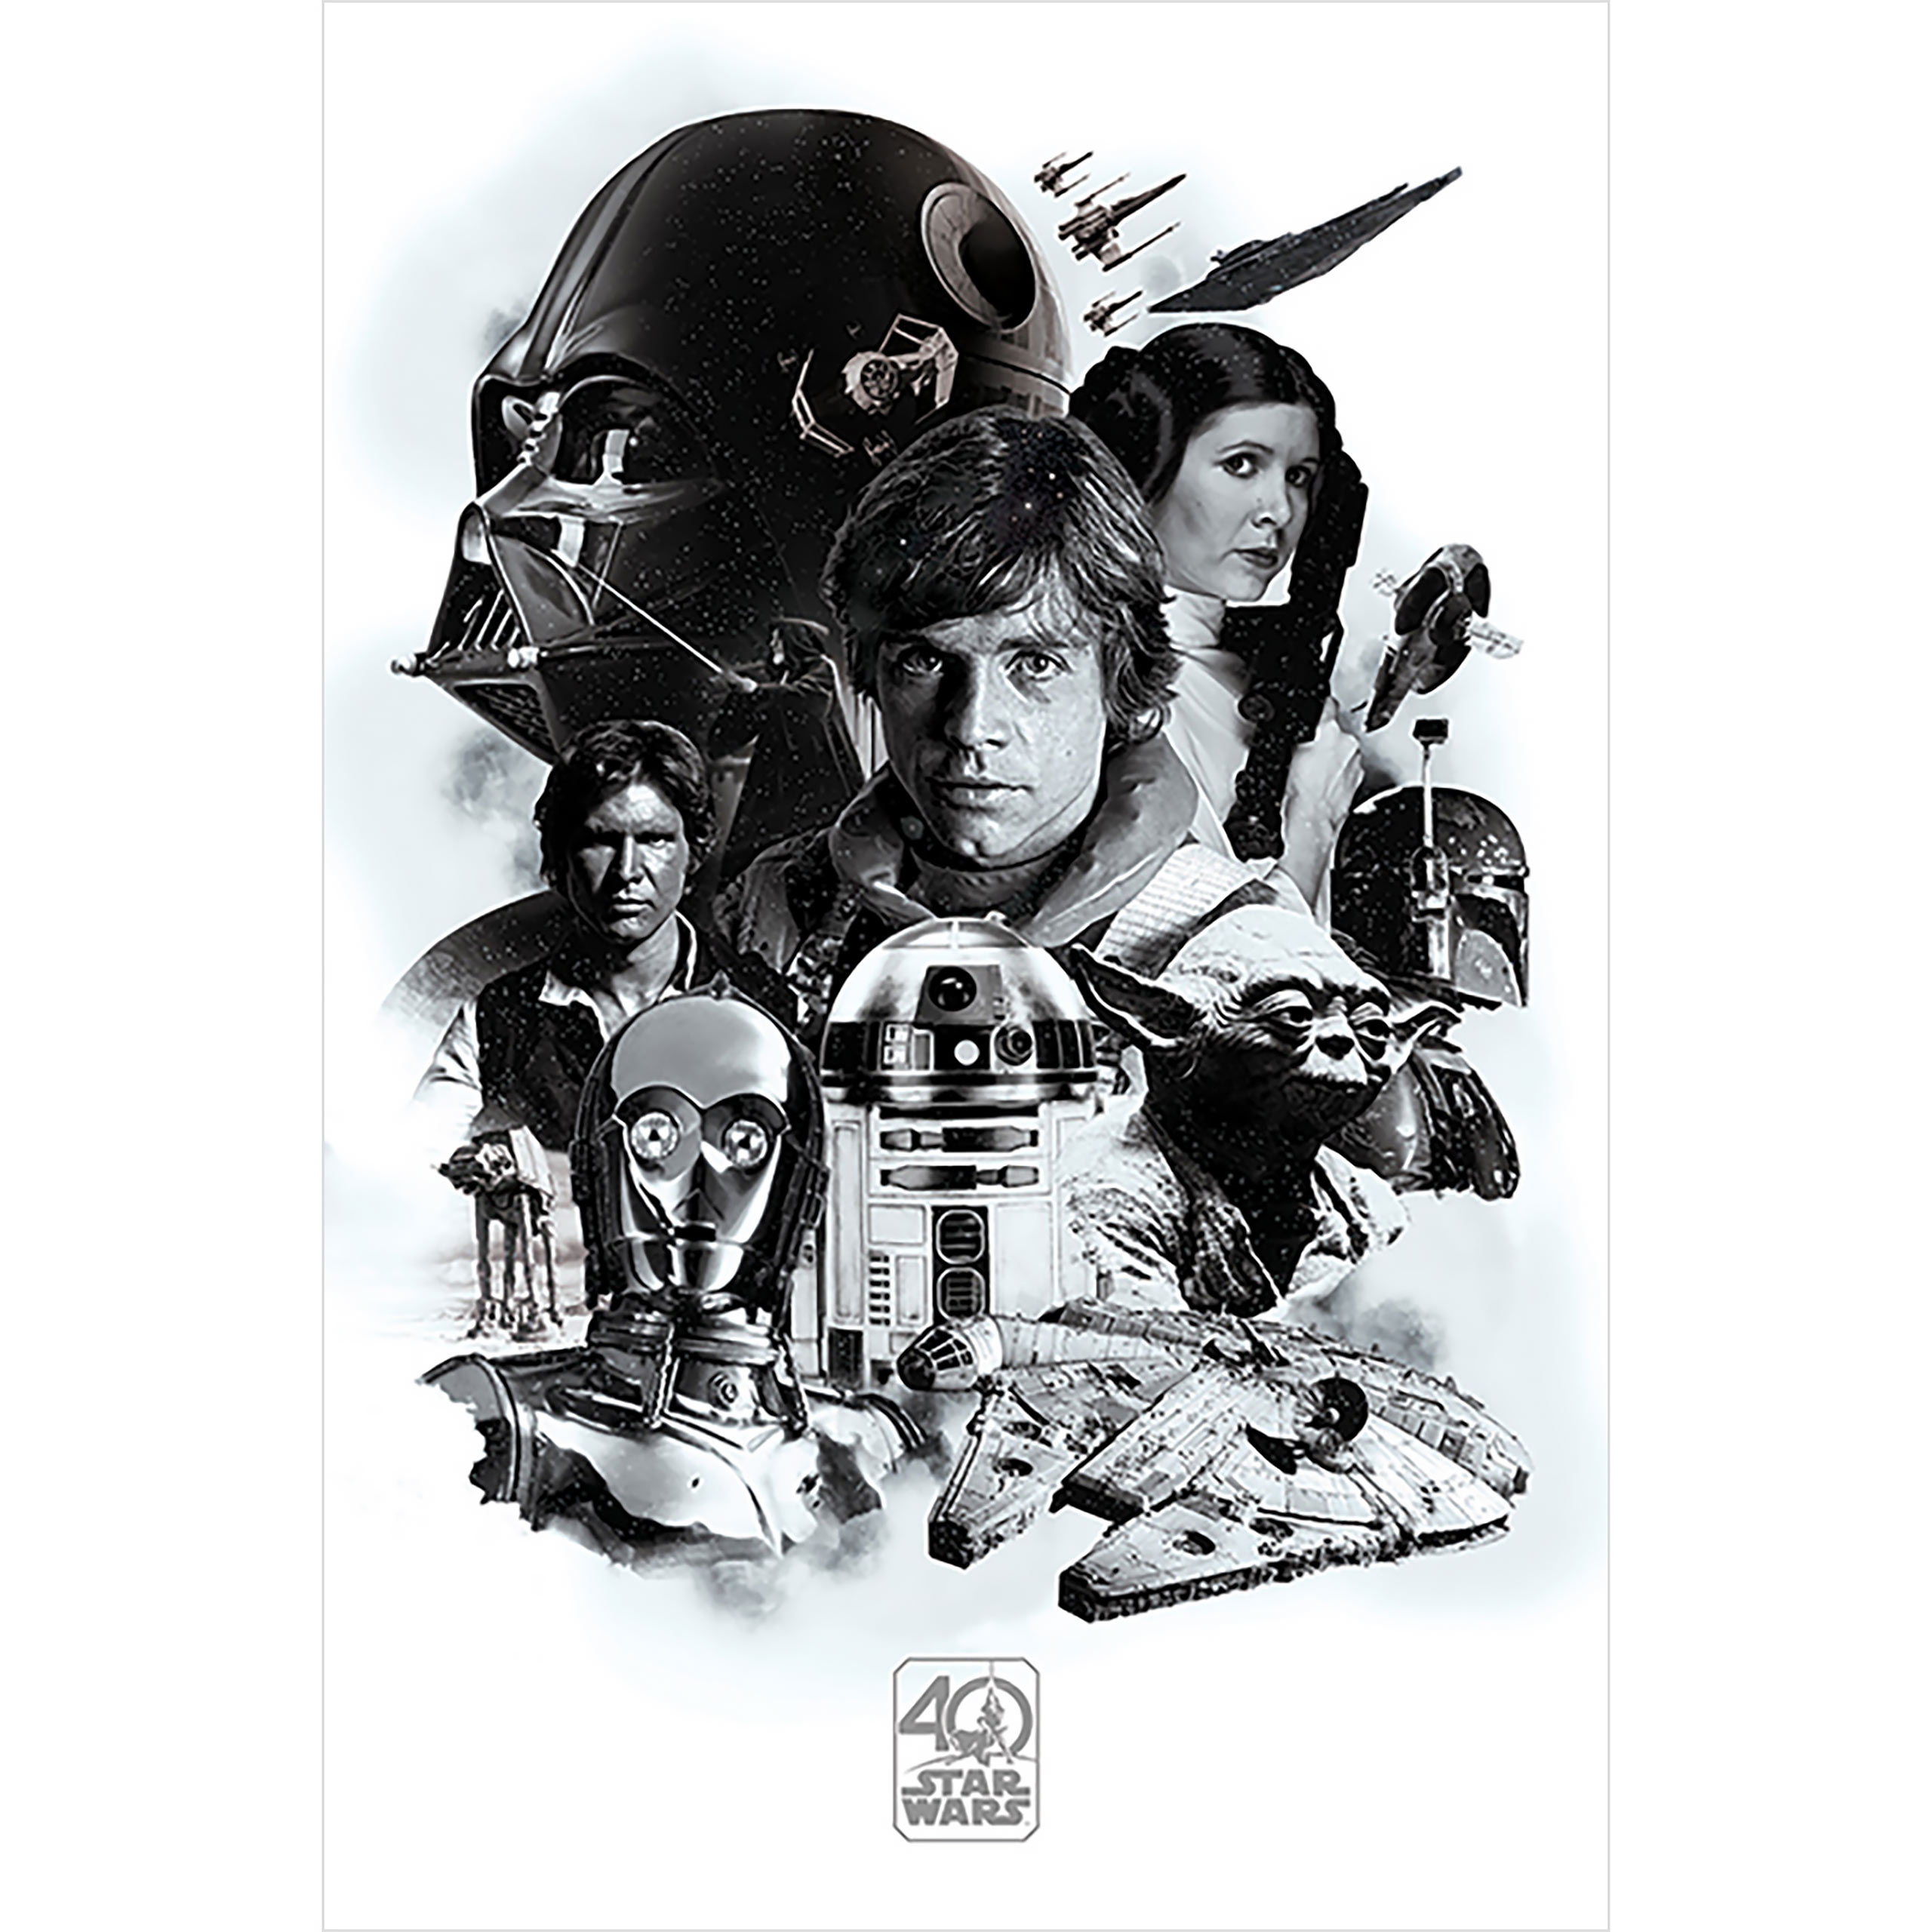 Star Wars - 40th Anniversary Montage Maxi Poster